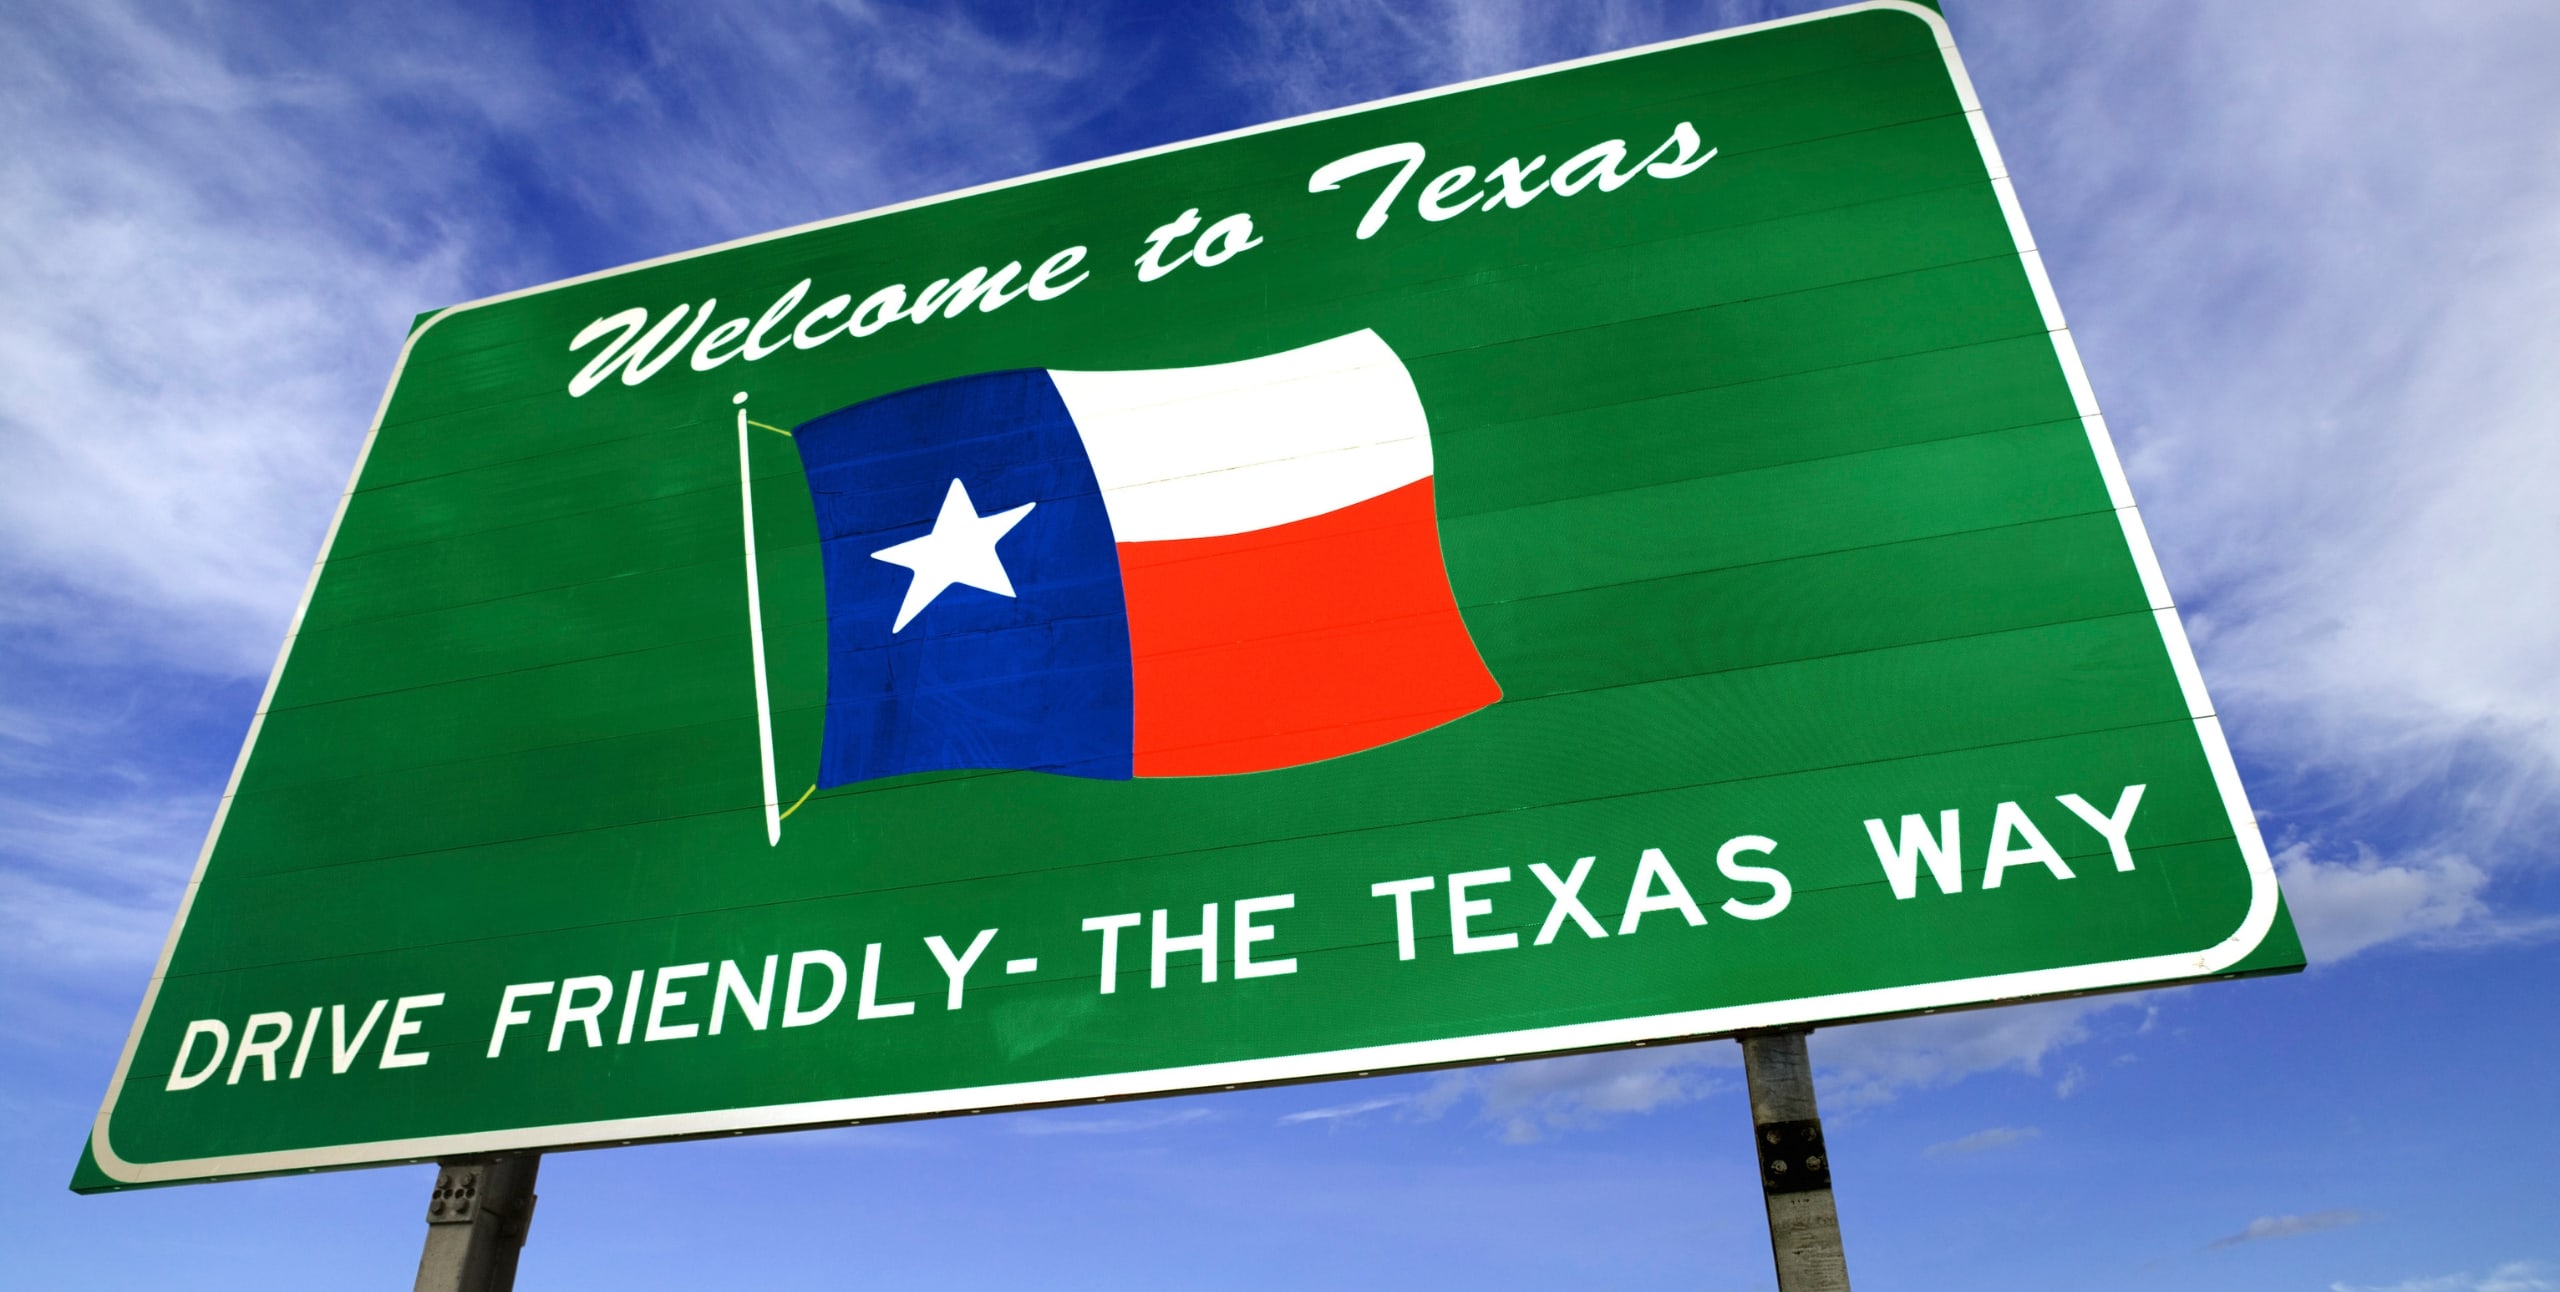 texas welcome sign